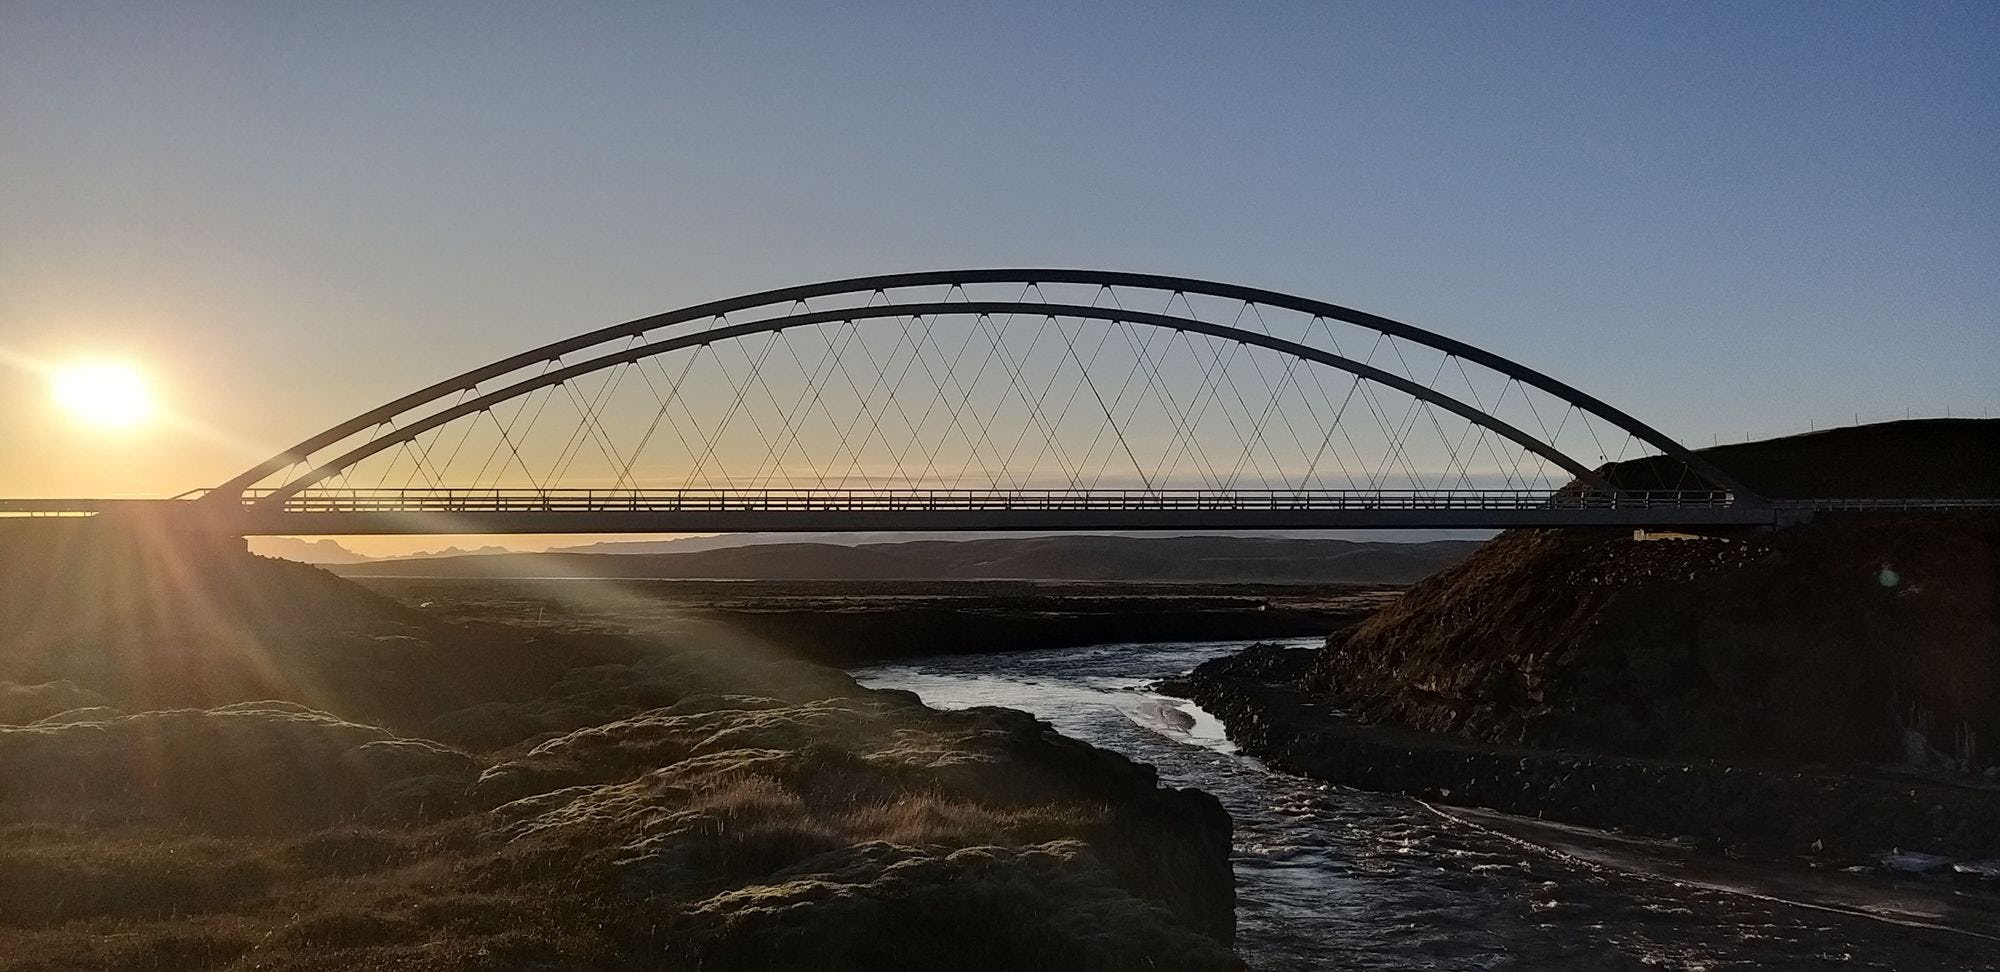 An arched bridge spanning across a river, captured at sunset